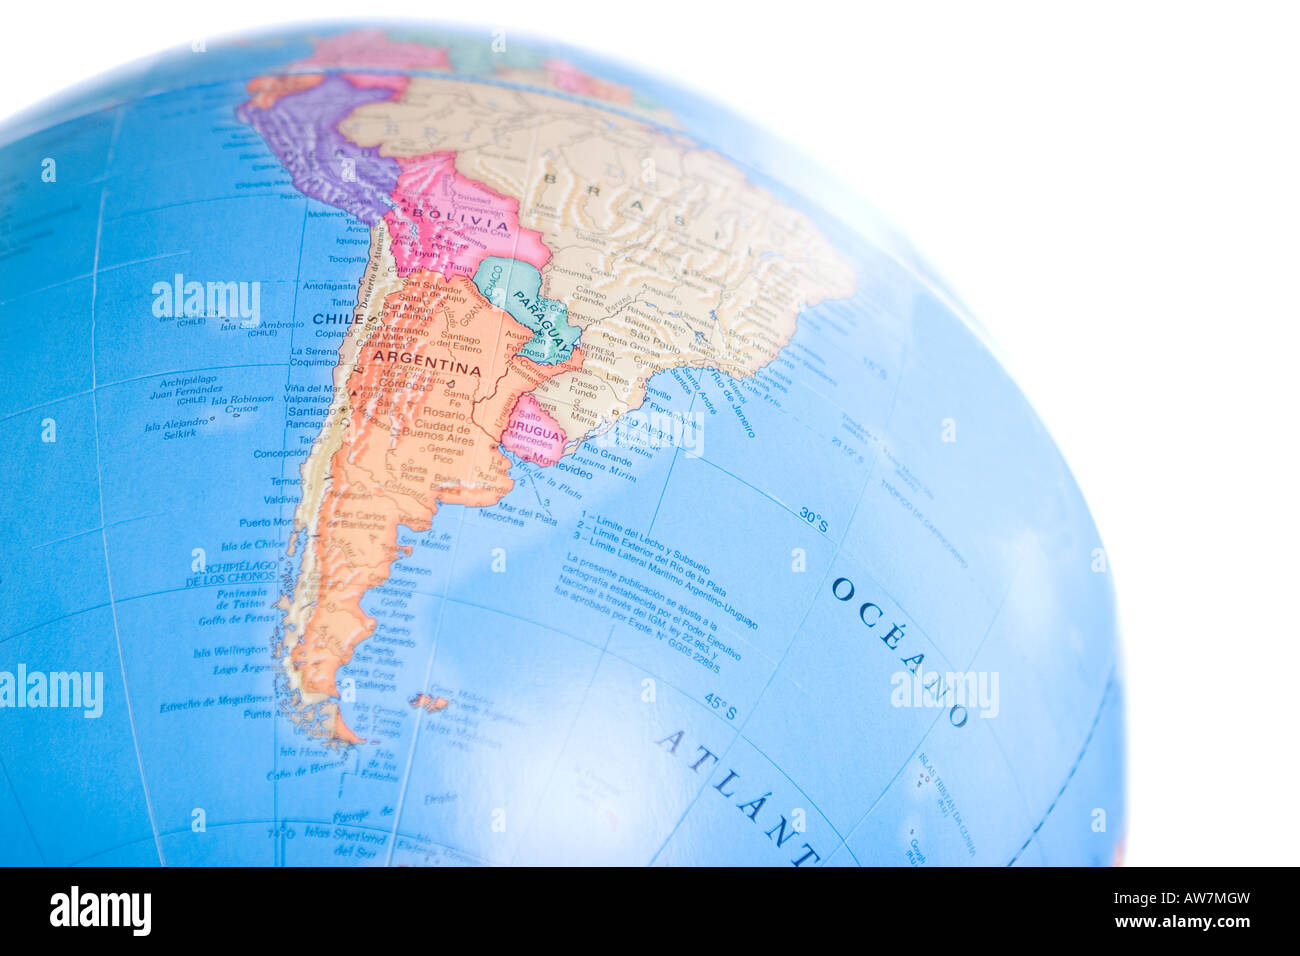 Globe World Map from south america with shalow depth of field and focus on Argentina and Chile Stock Photo